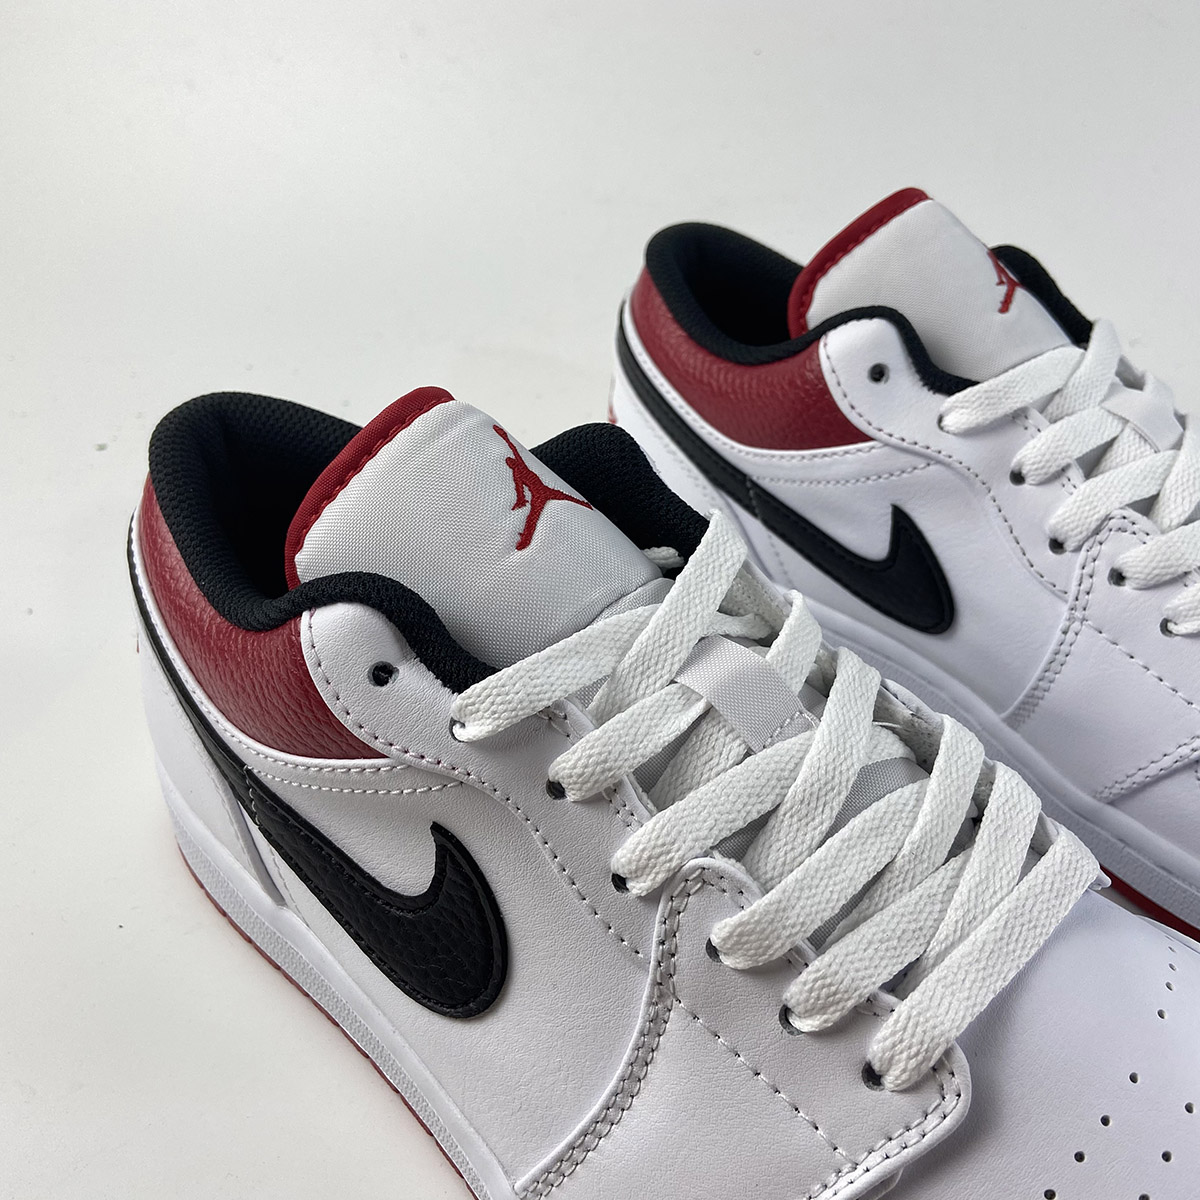 Air Jordan 1 Low White University Red Black For Sale – The Sole Line